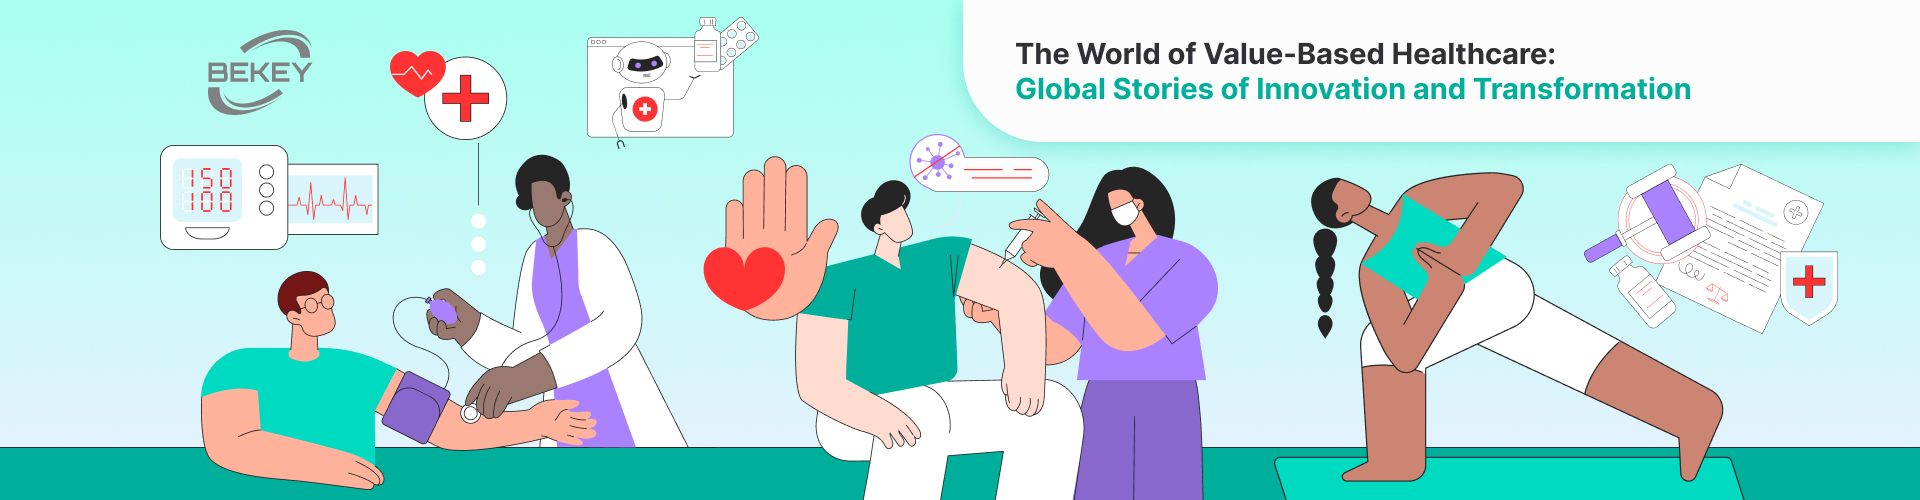 The World of Value-Based Healthcare: Global Stories of Innovation and Transformation - image